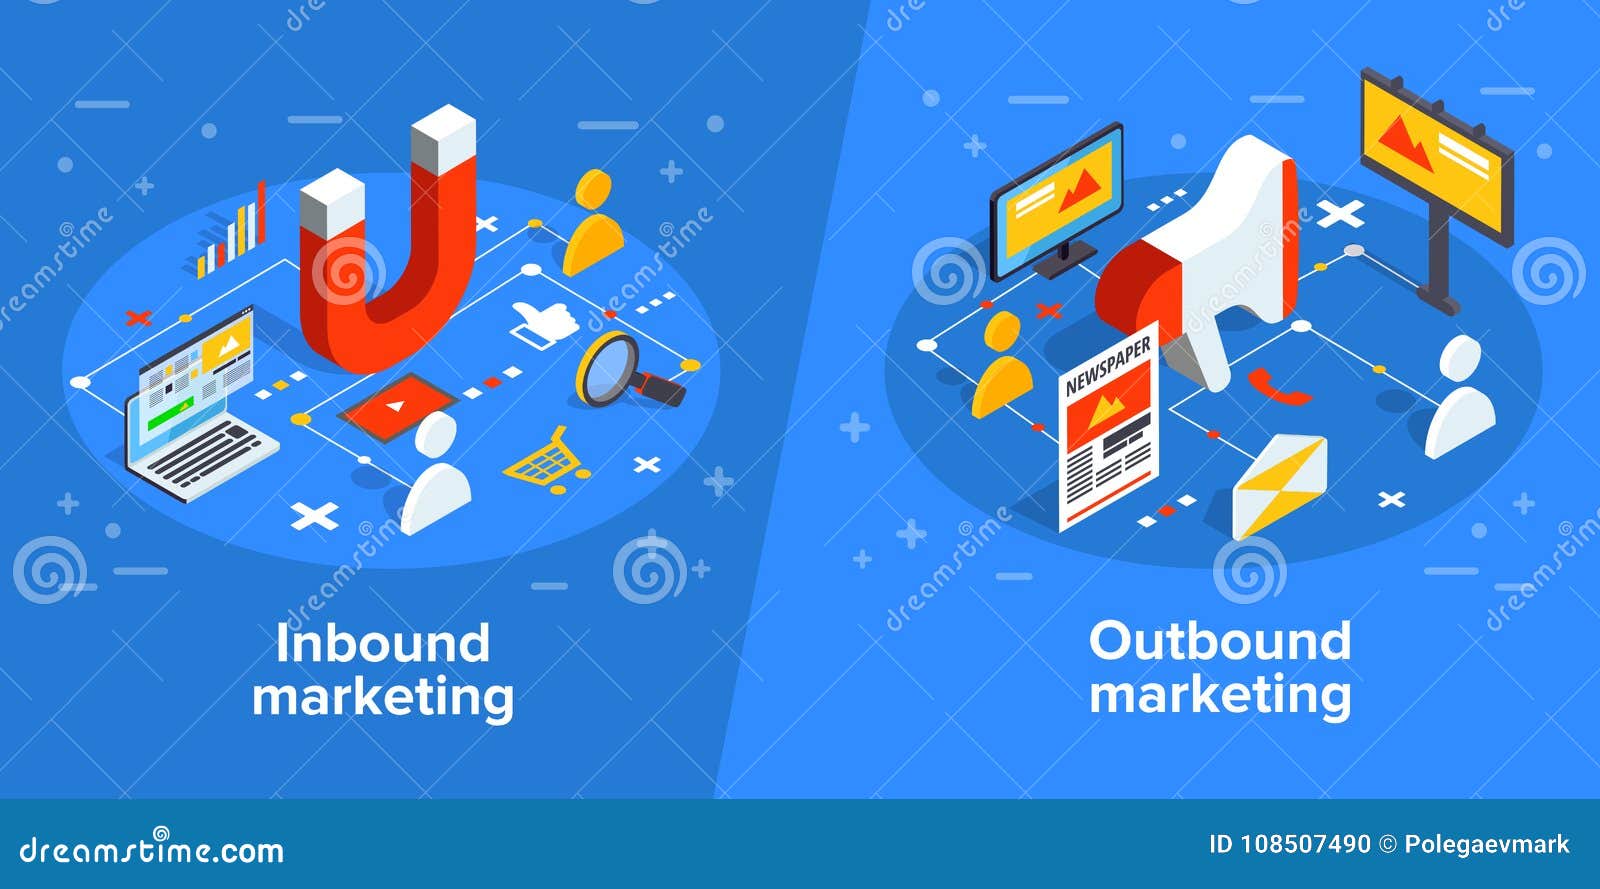 inbound and outbound marketing  business  in i